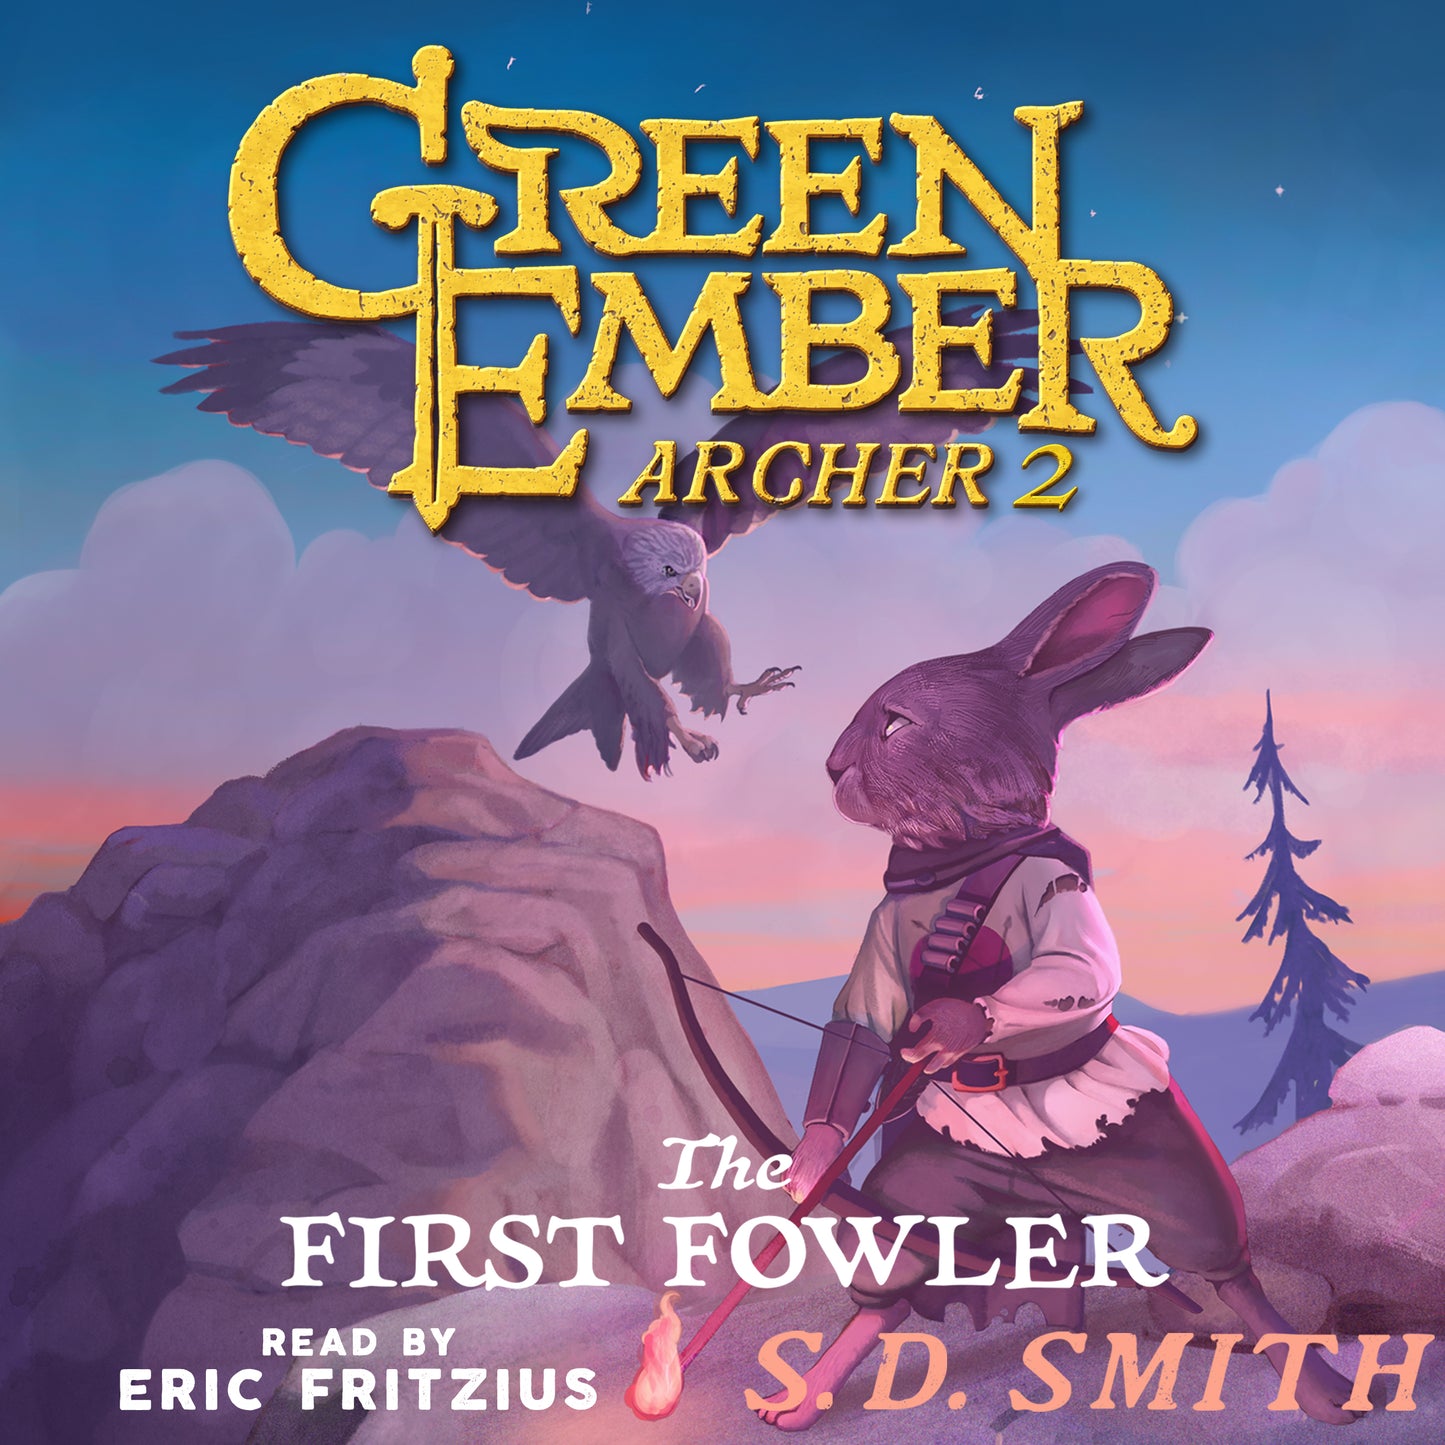 The First Fowler (Green Ember Archer Book II) - Audiobook Download